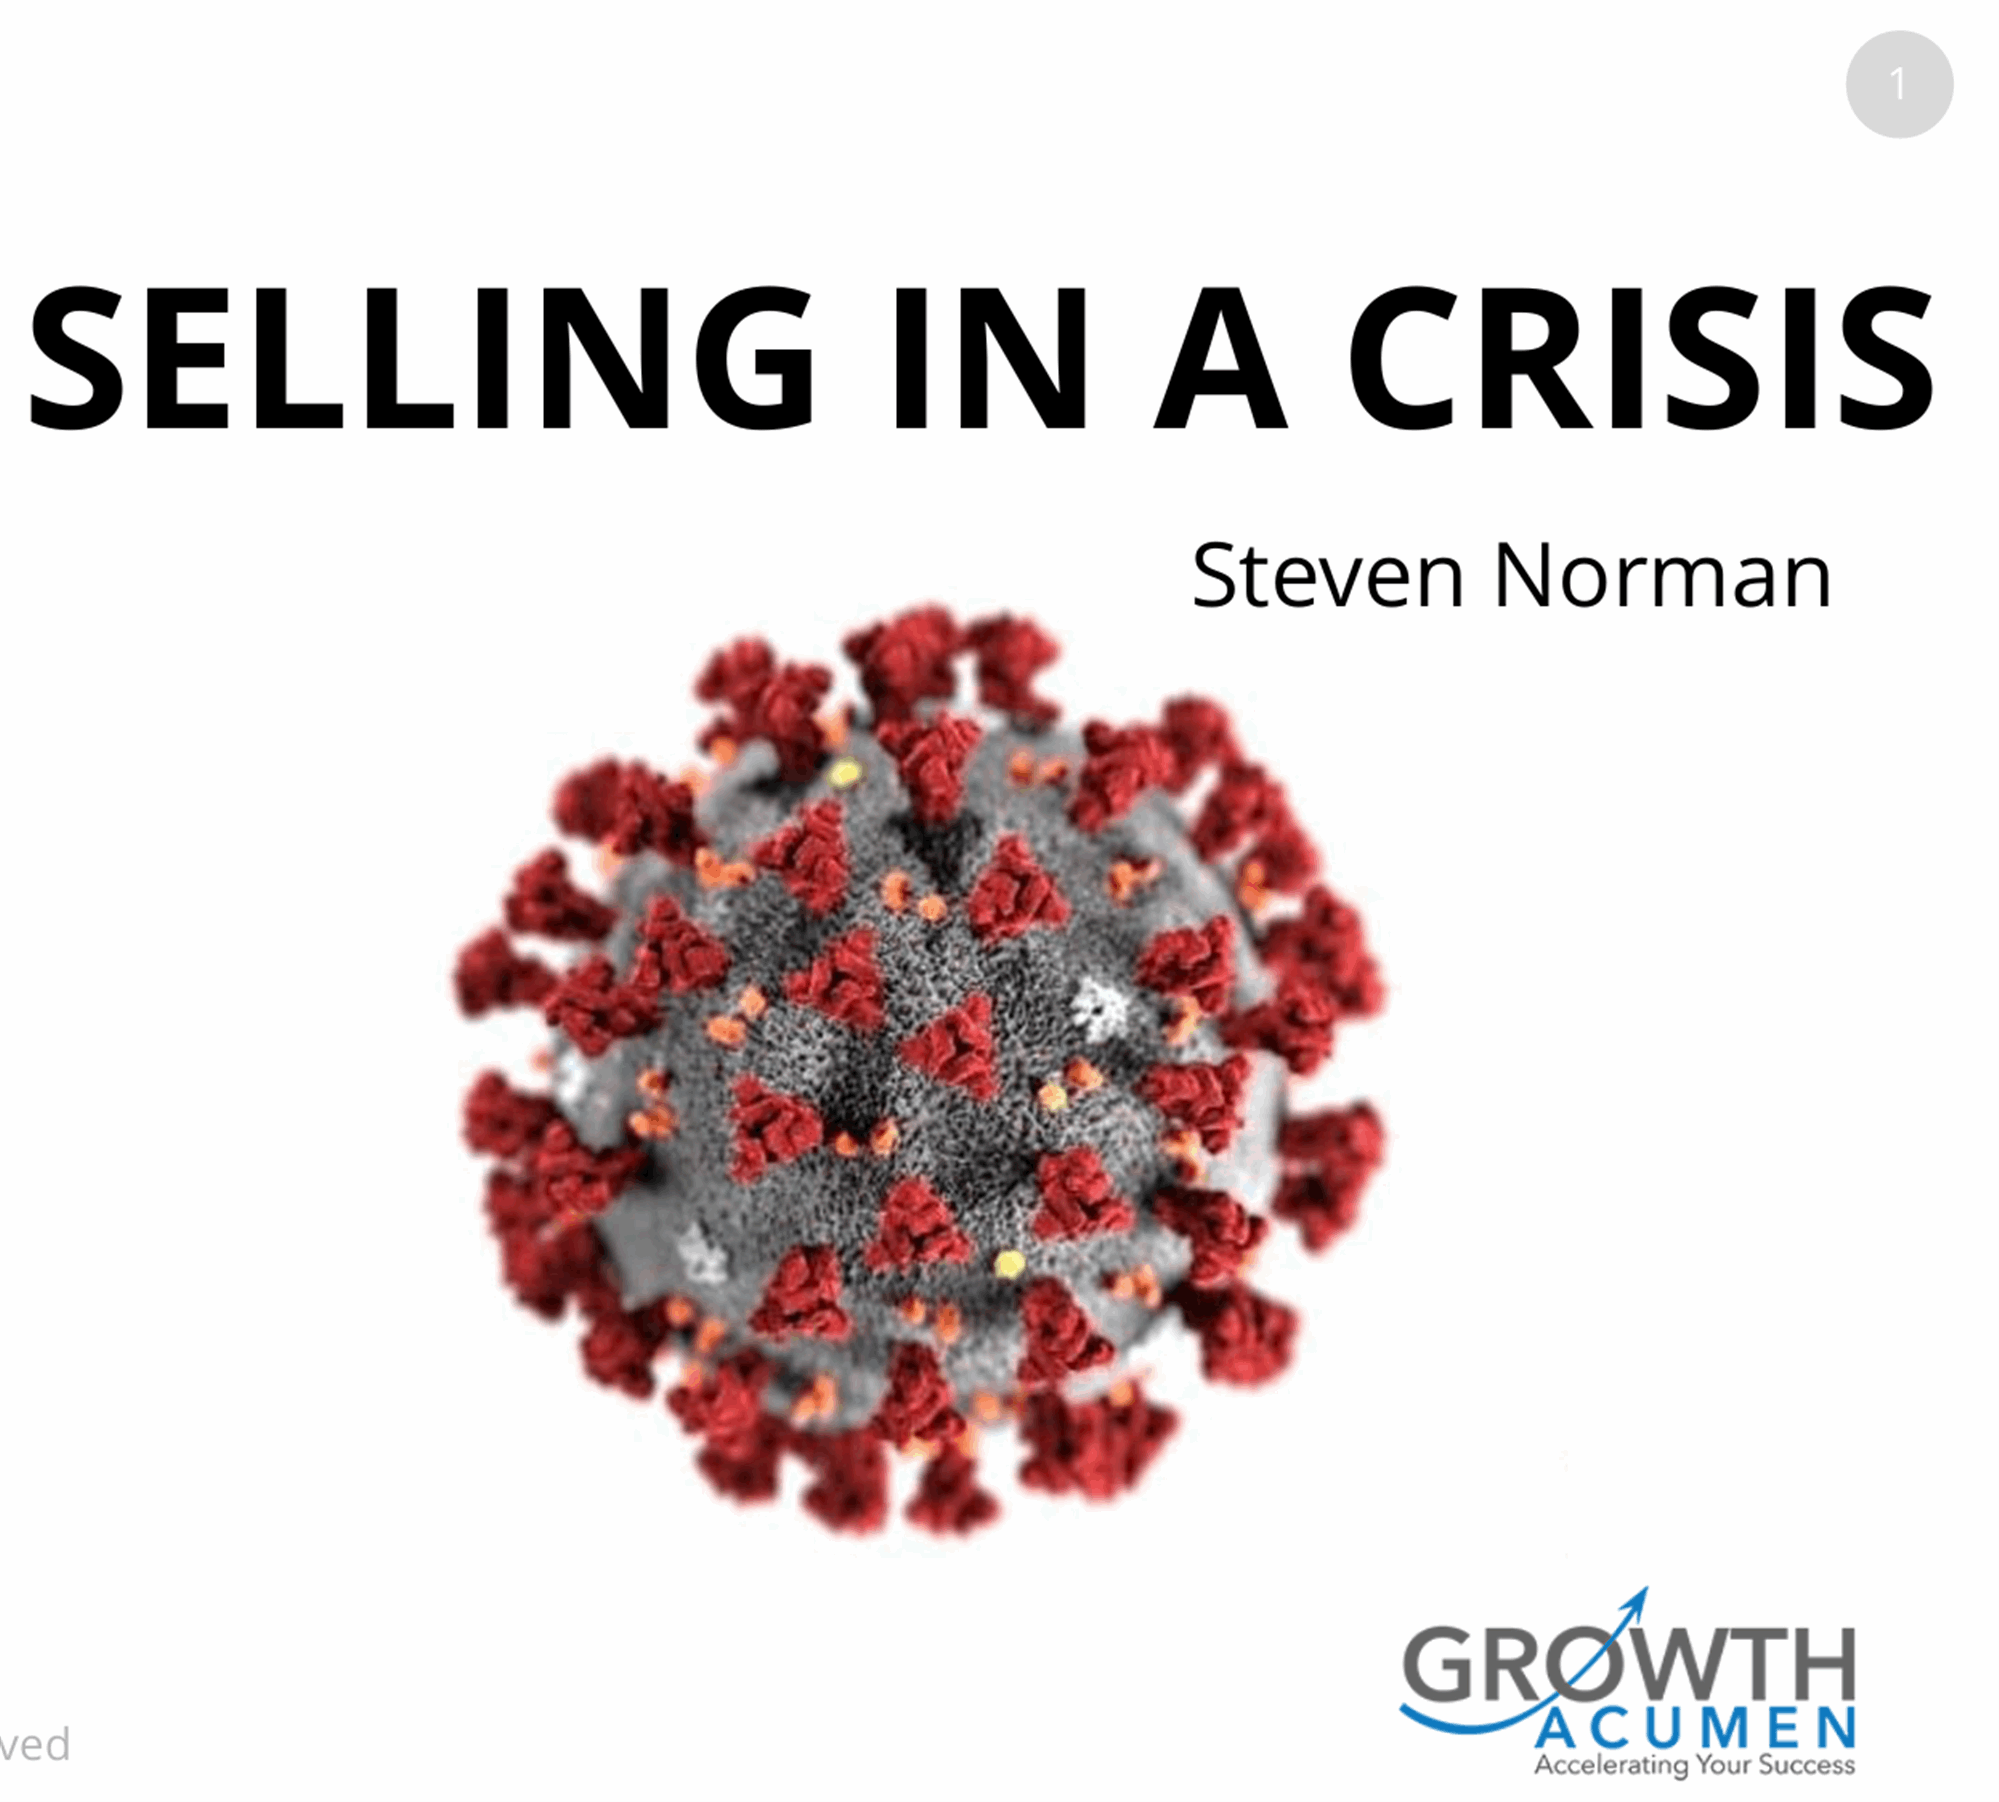 'Selling in a Crisis' by Steven Norman